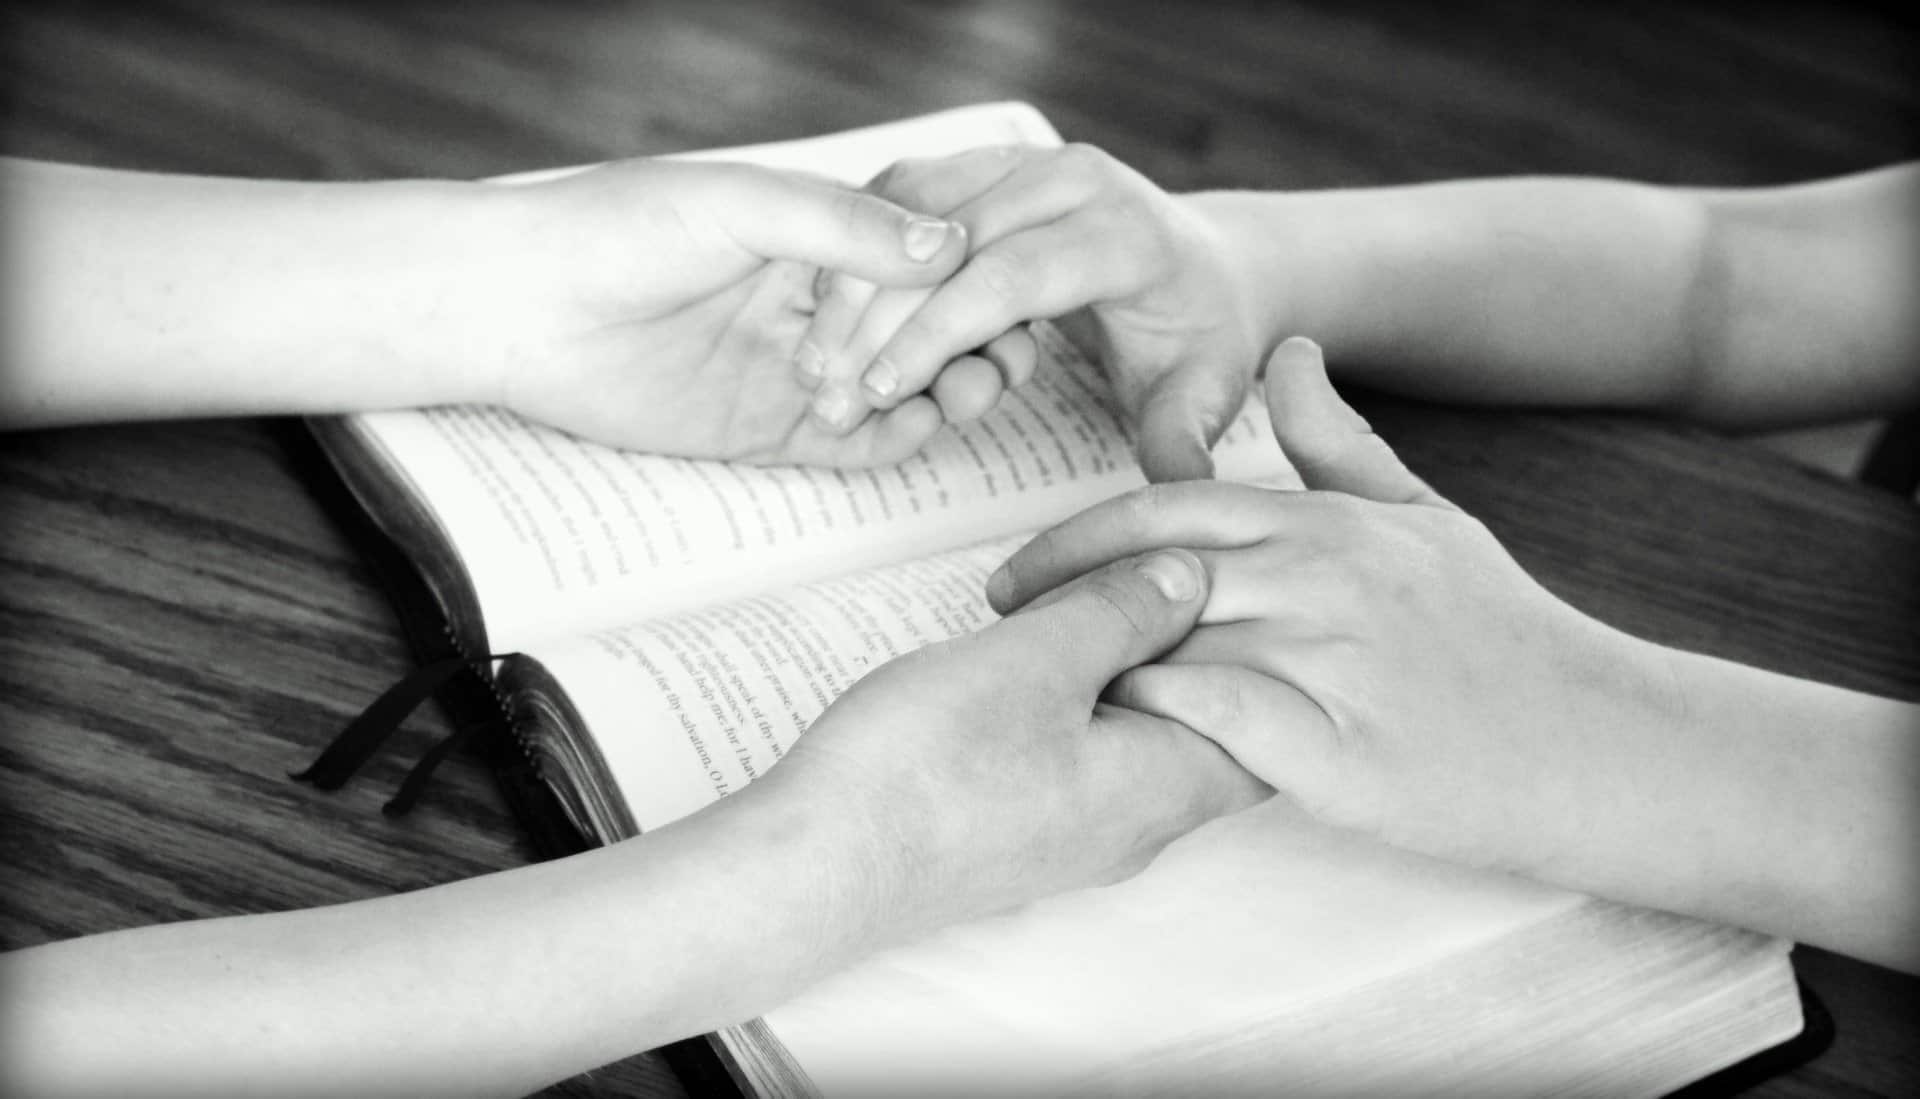 Black and white image shows two people's hands a forearms. The people are holding hands resting on a bible that is open on a table top.